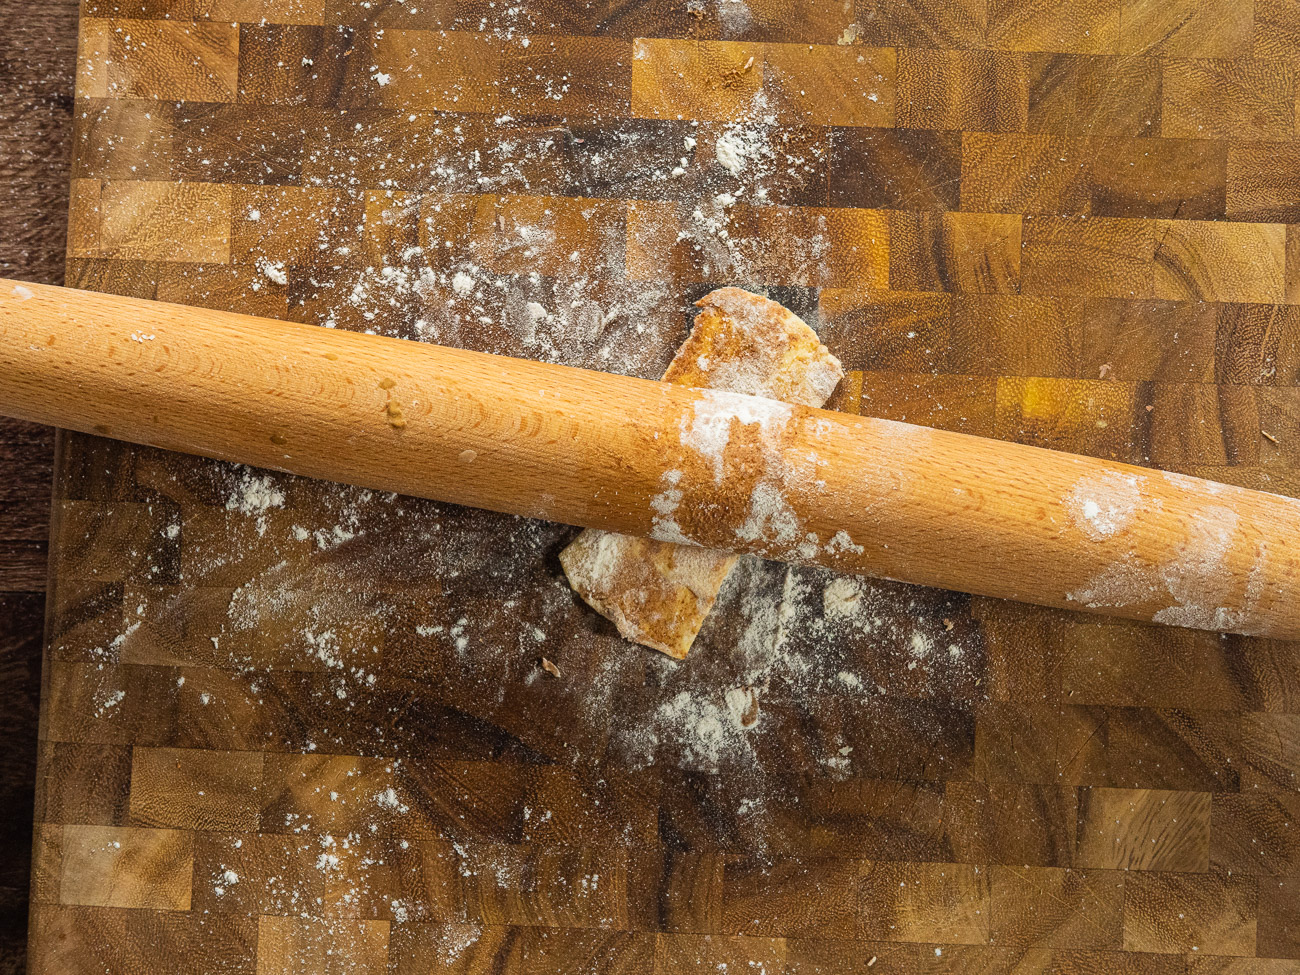 Cut cinnamon rolls in 1/4-inch thick slices. Sprinkle each piece with flour, then with a rolling pin, roll each piece on a floured surface until thin.